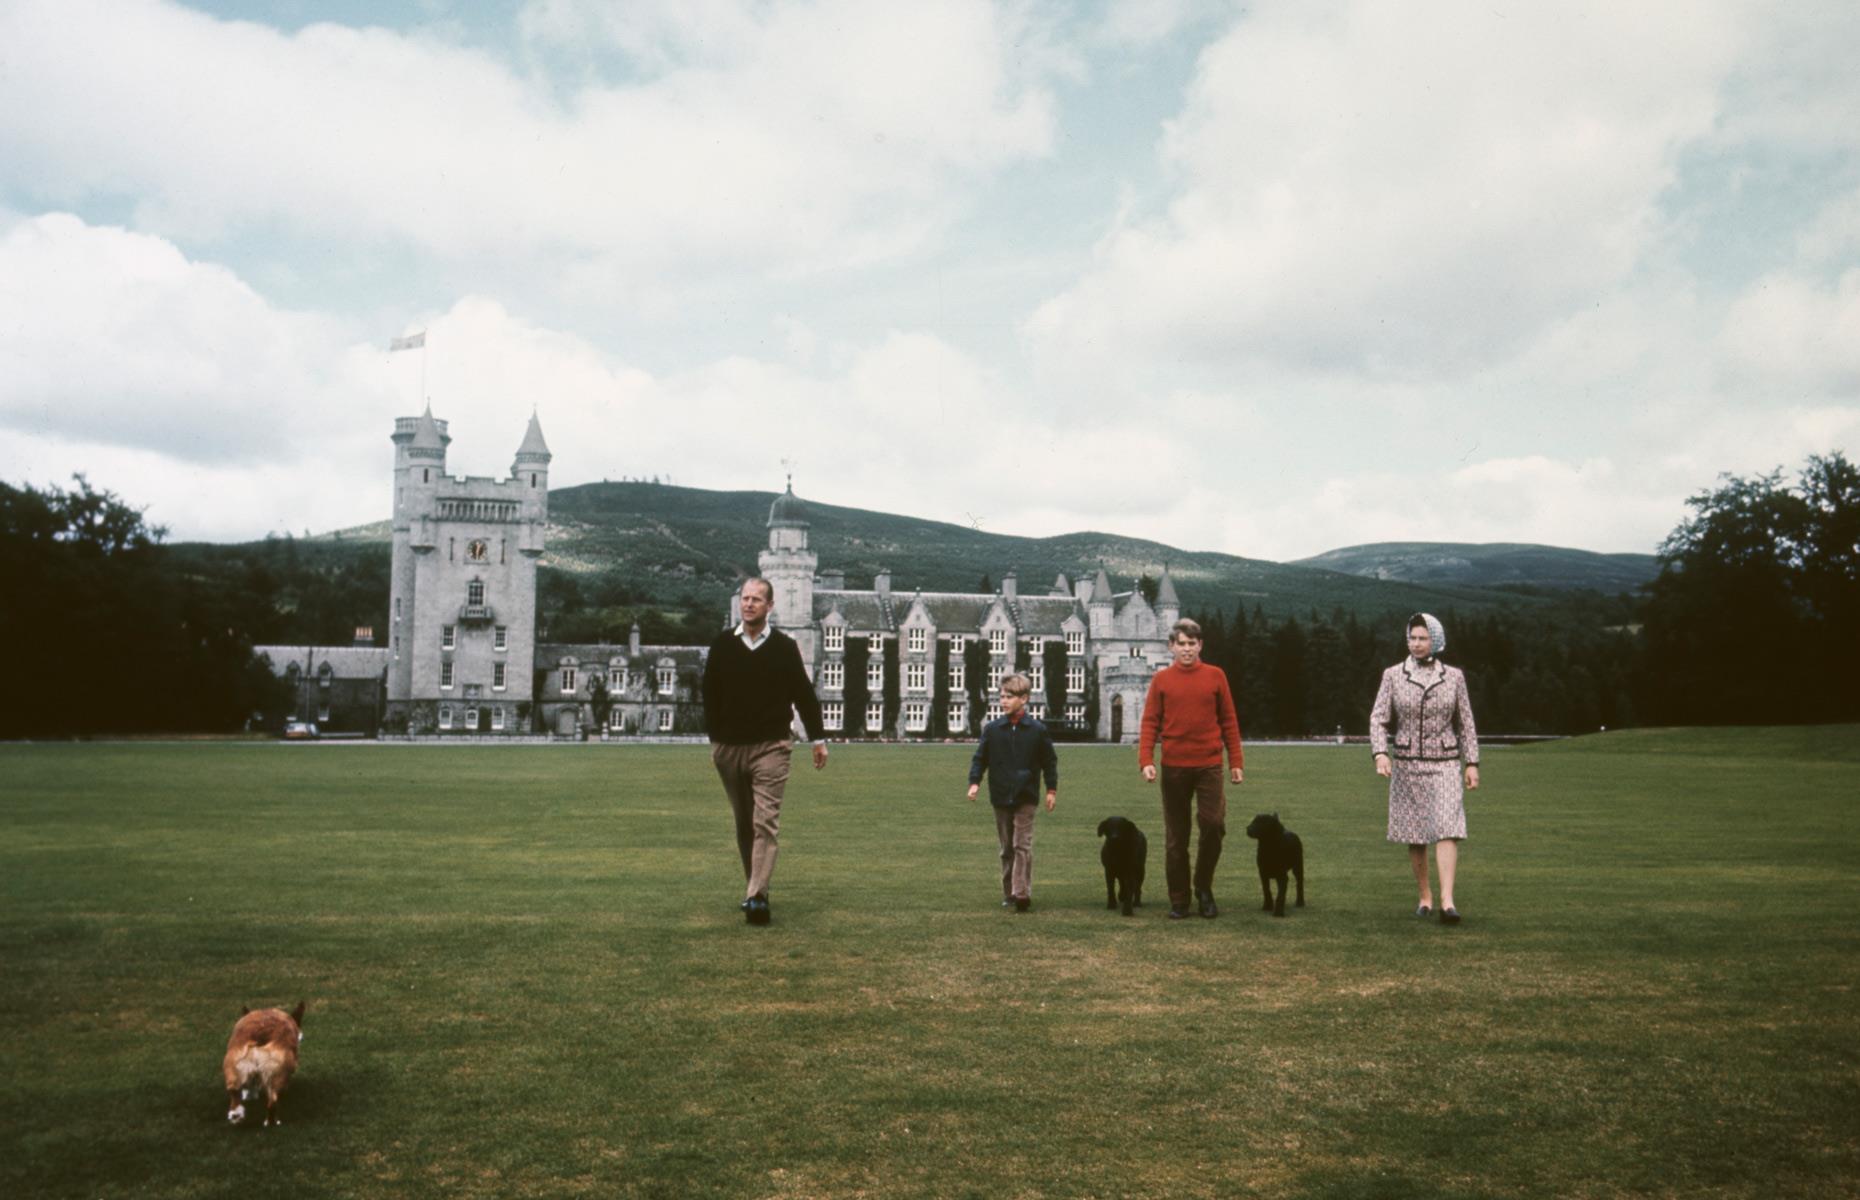 <p>It is well known that the late Queen thought of Balmoral as her favorite place on earth, enjoying many summers here with her family over the decades.</p>  <p>Her son King Charles, however, has always preferred to stay at Birkhall on the edge of the estate inherited from the Queen Mother in 2002, rather than in the main house. If he ever gets bored though, there are 150 buildings and cottages on the vast estate. Several of these are available as vacation rentals.</p>